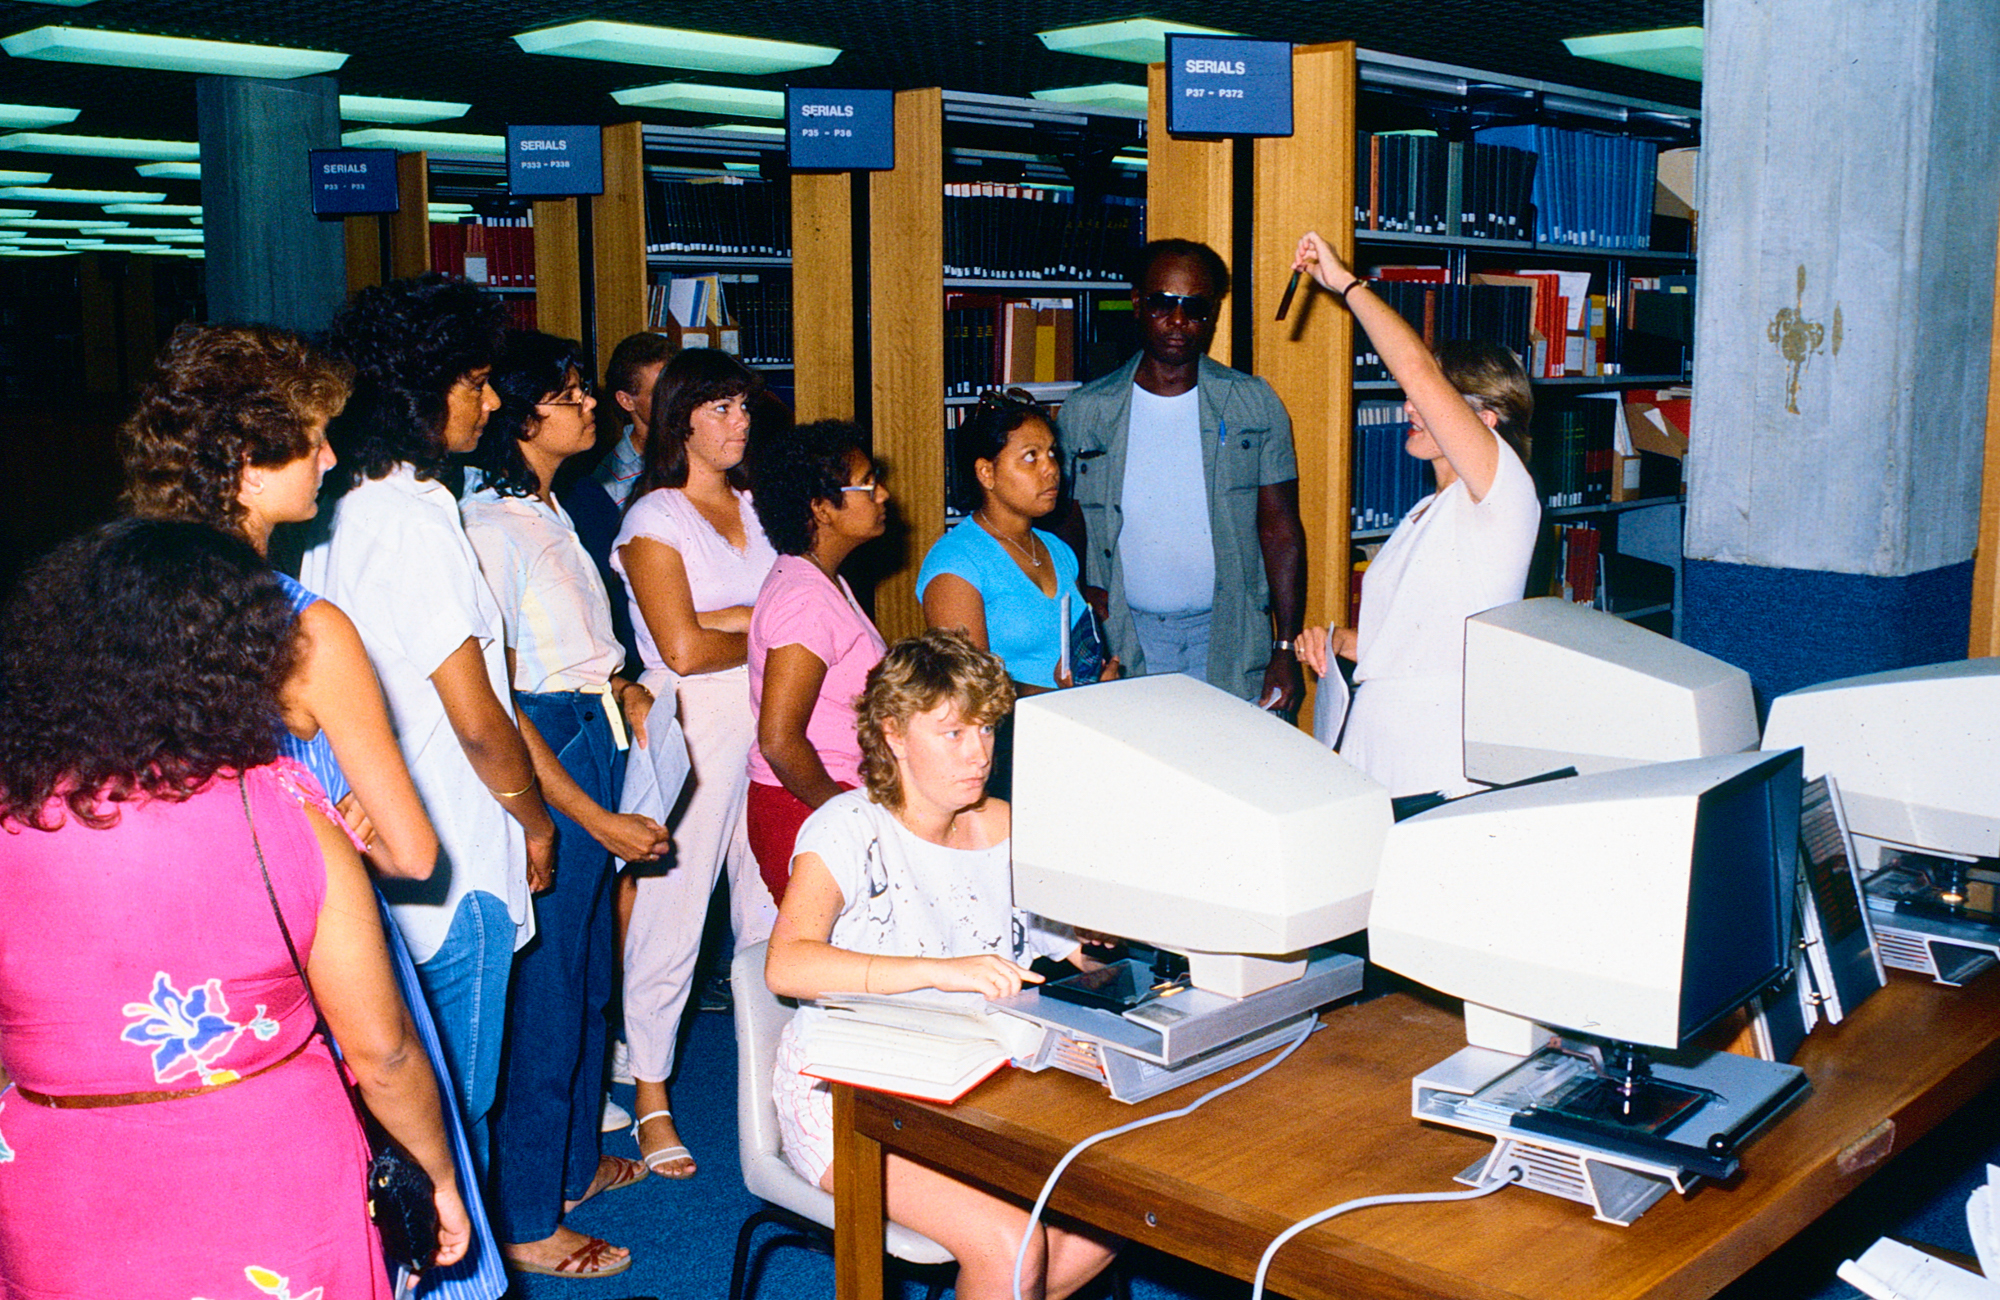 a student sits at a large white computer, behind her a staff member is showing a group around. library book shelves are in the background.